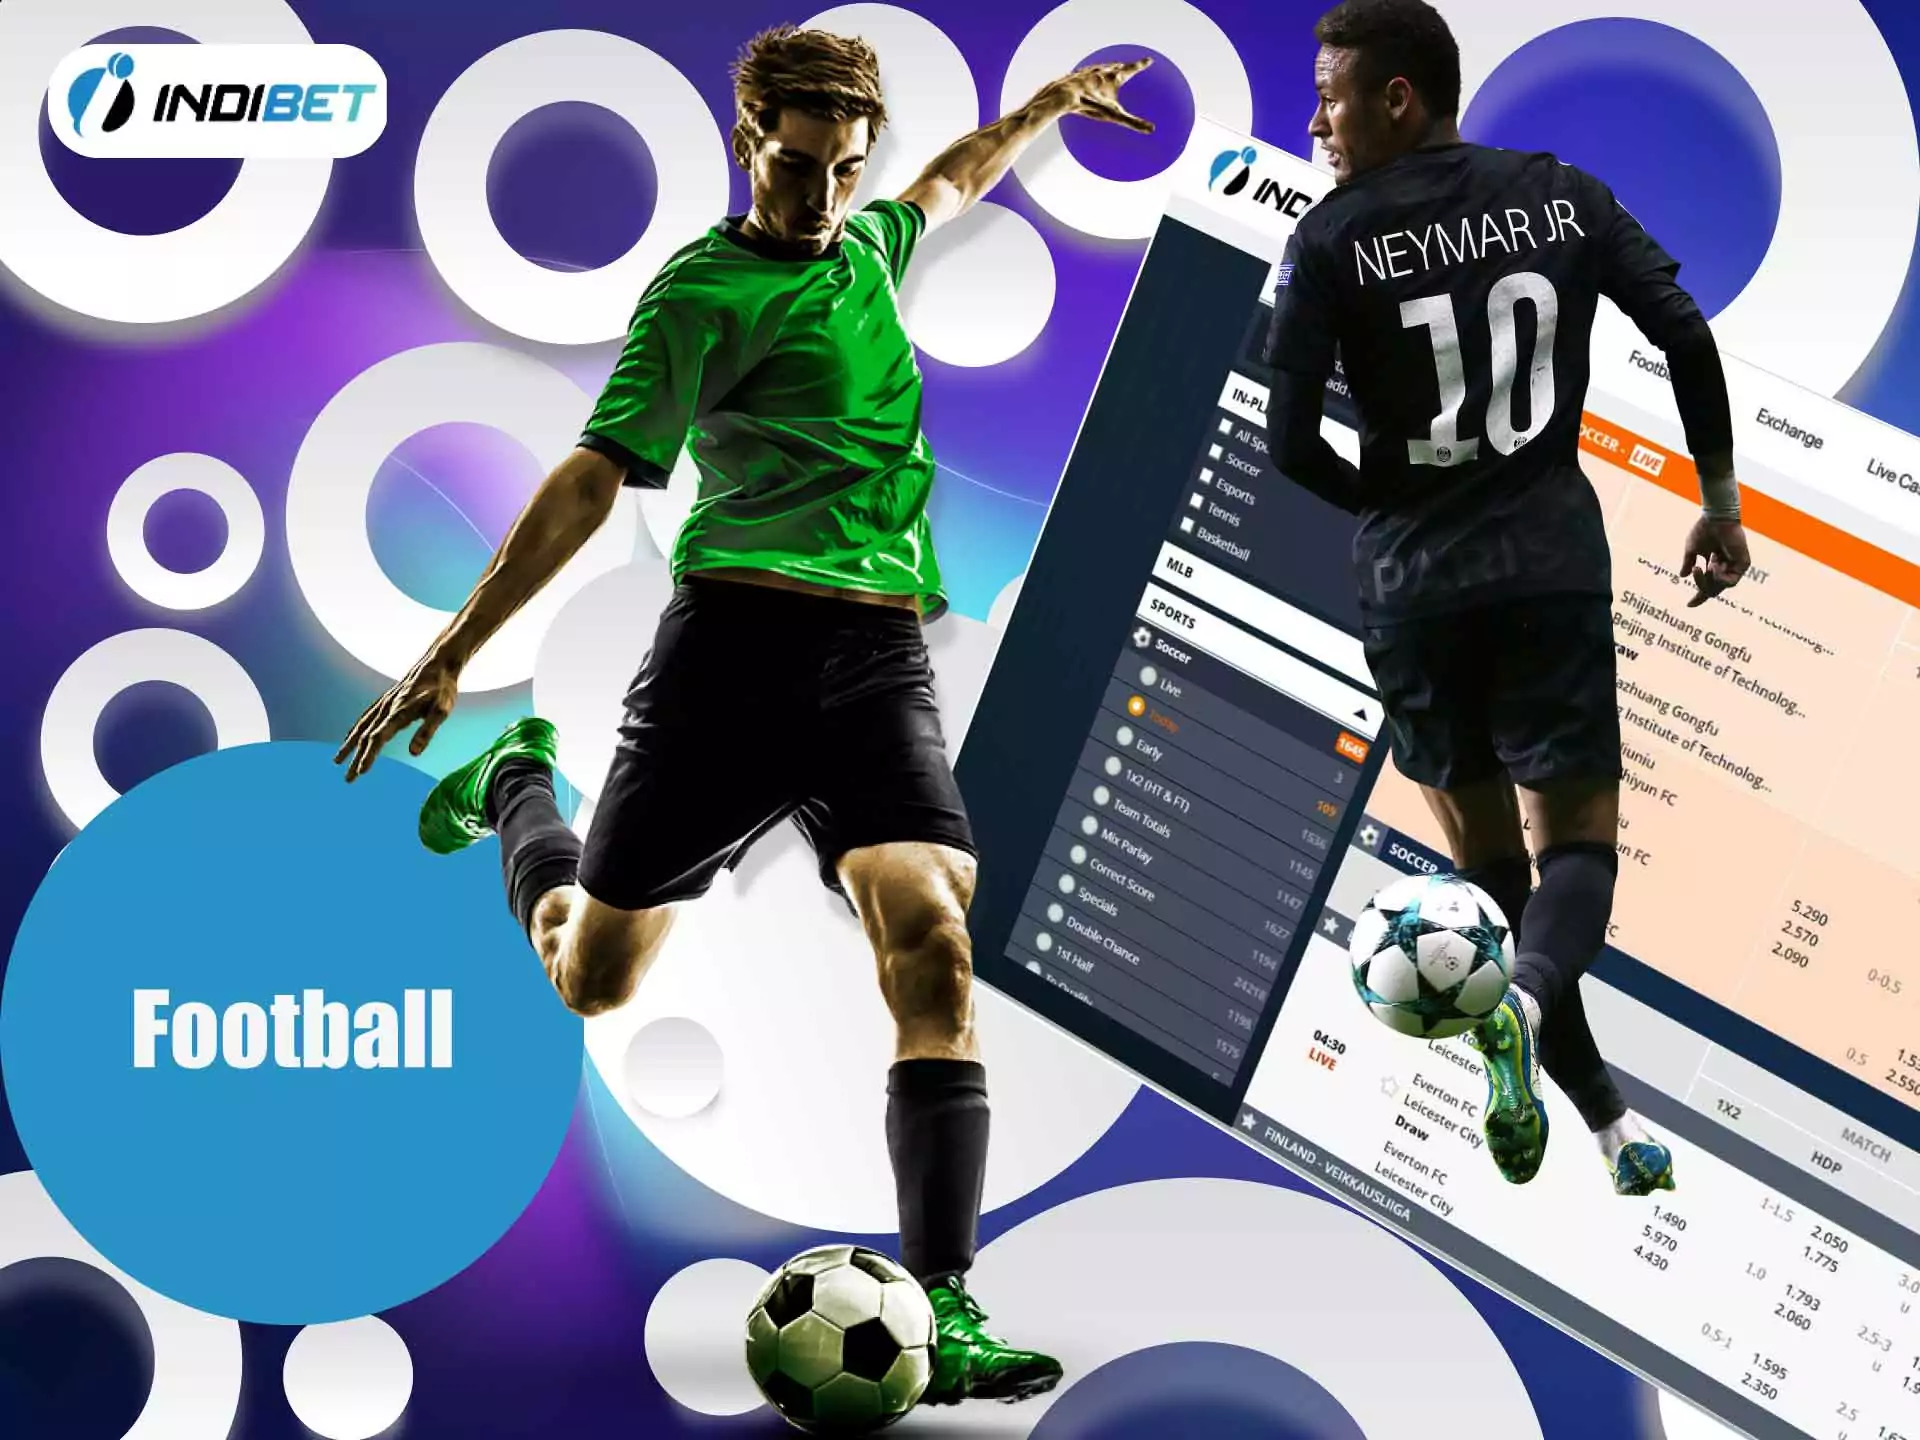 There are many football leagues that you can bet on at Indibet.